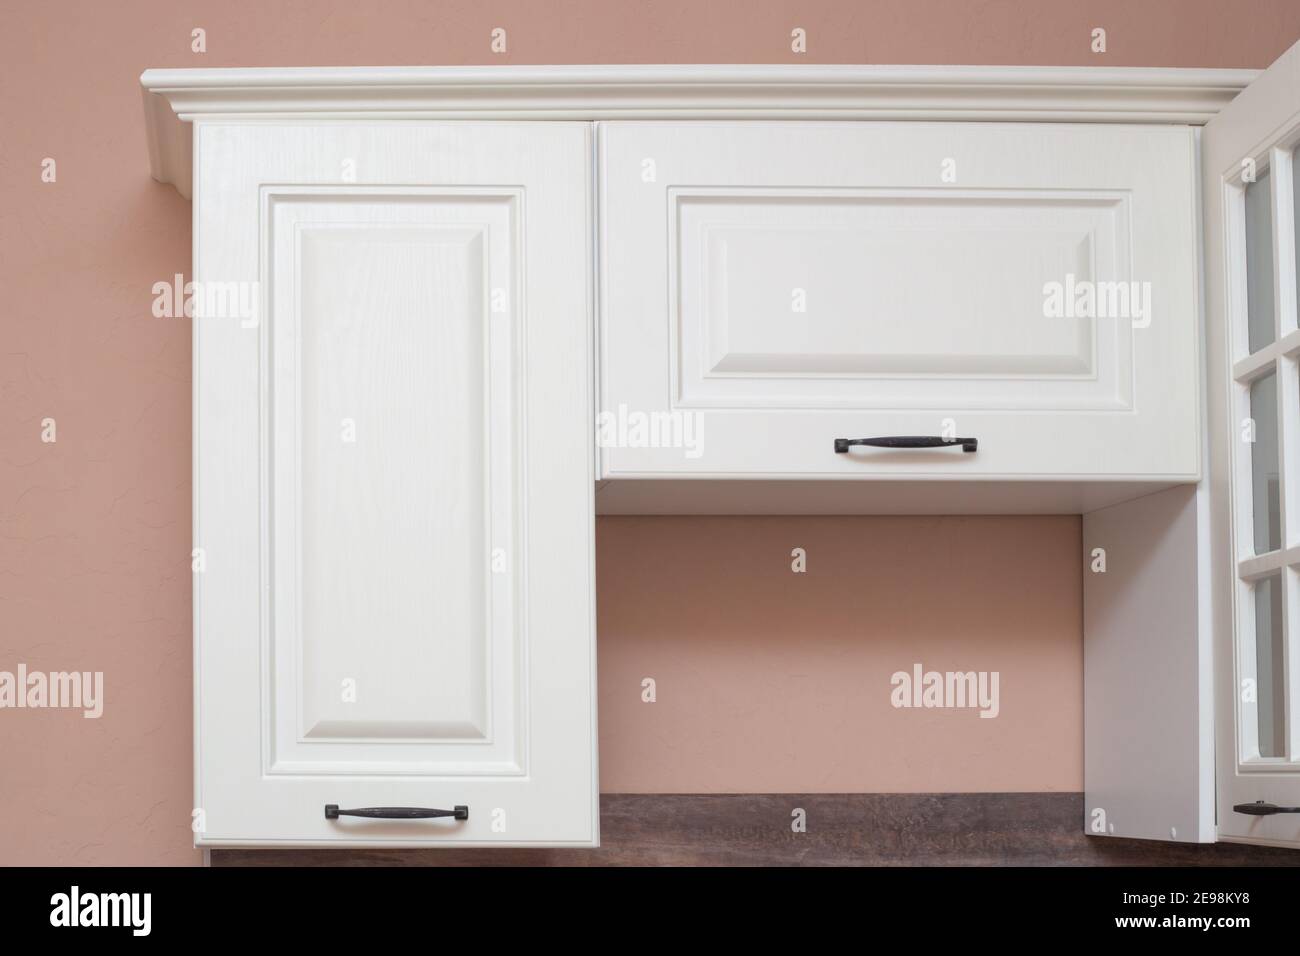 White kitchen cabinets on the background of a beige wall. Kitchen interier. Stock Photo